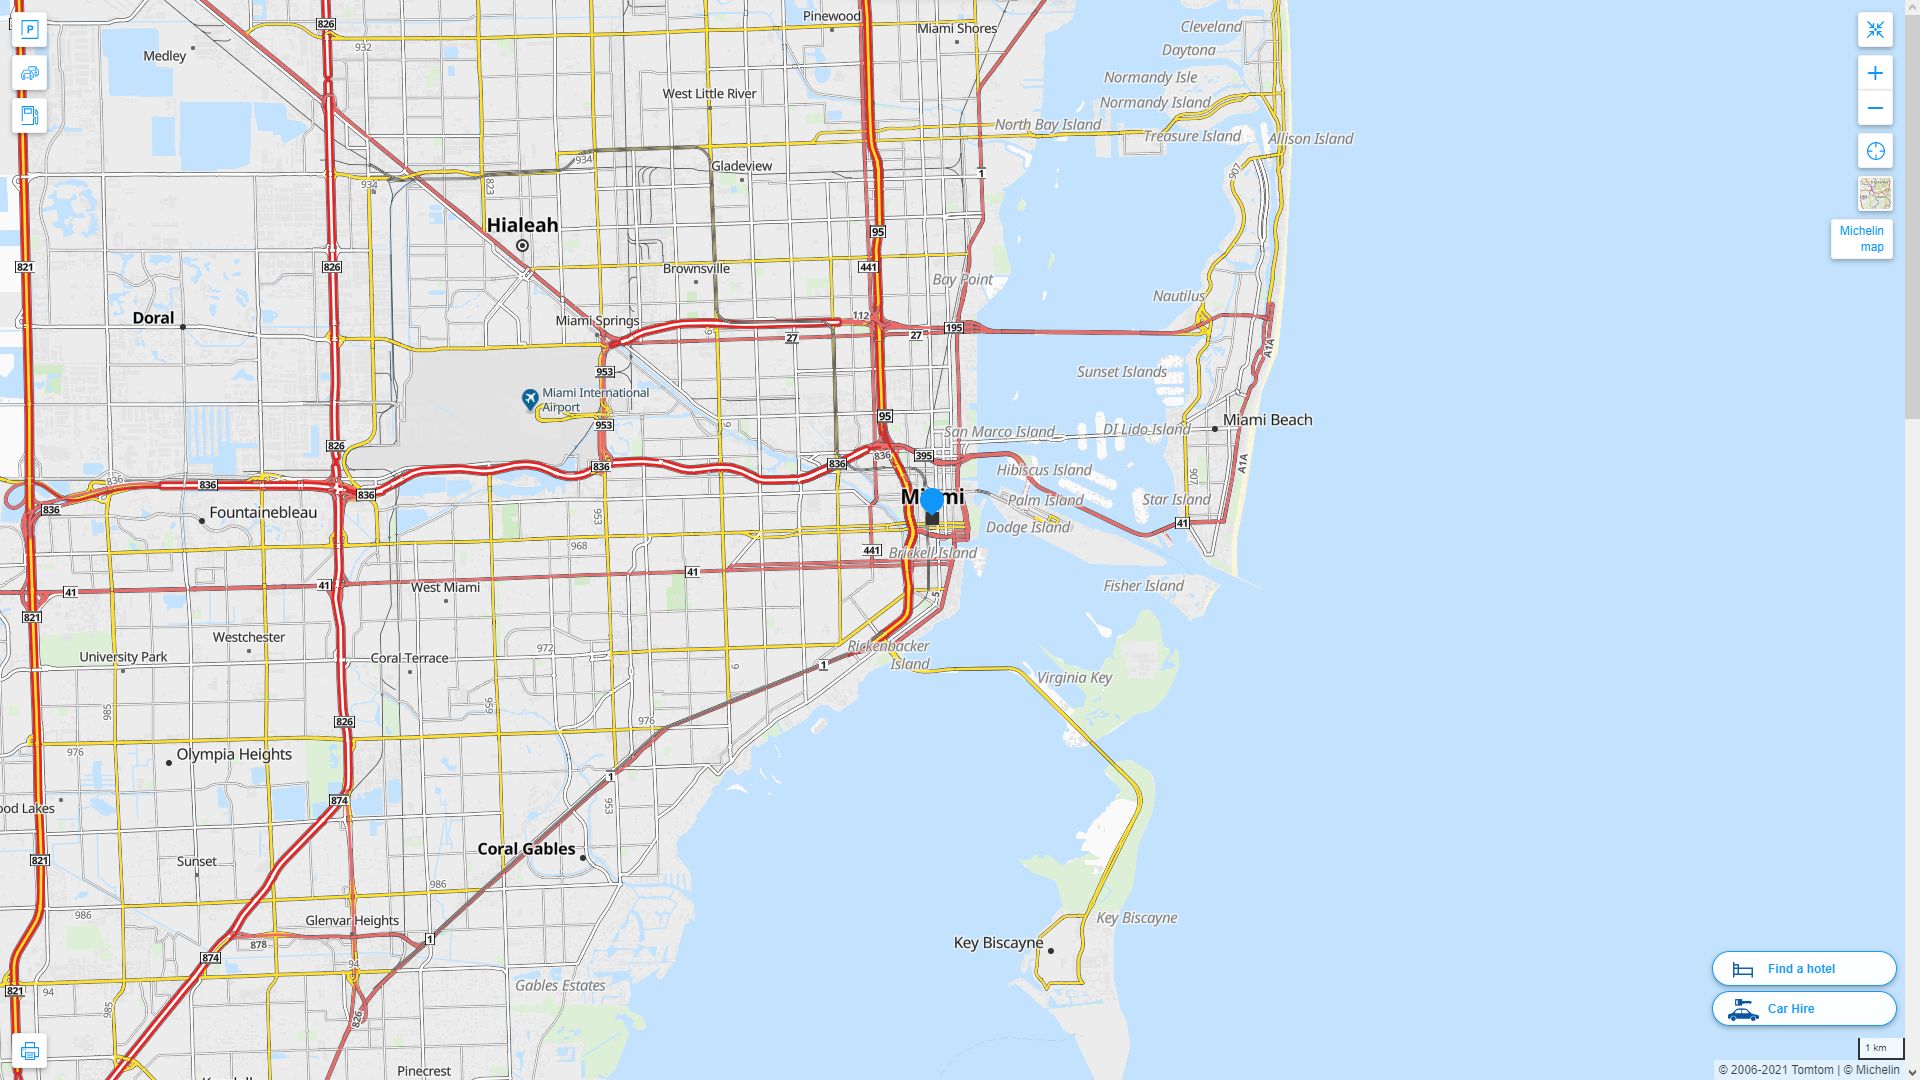 Miami Florida Highway and Road Map